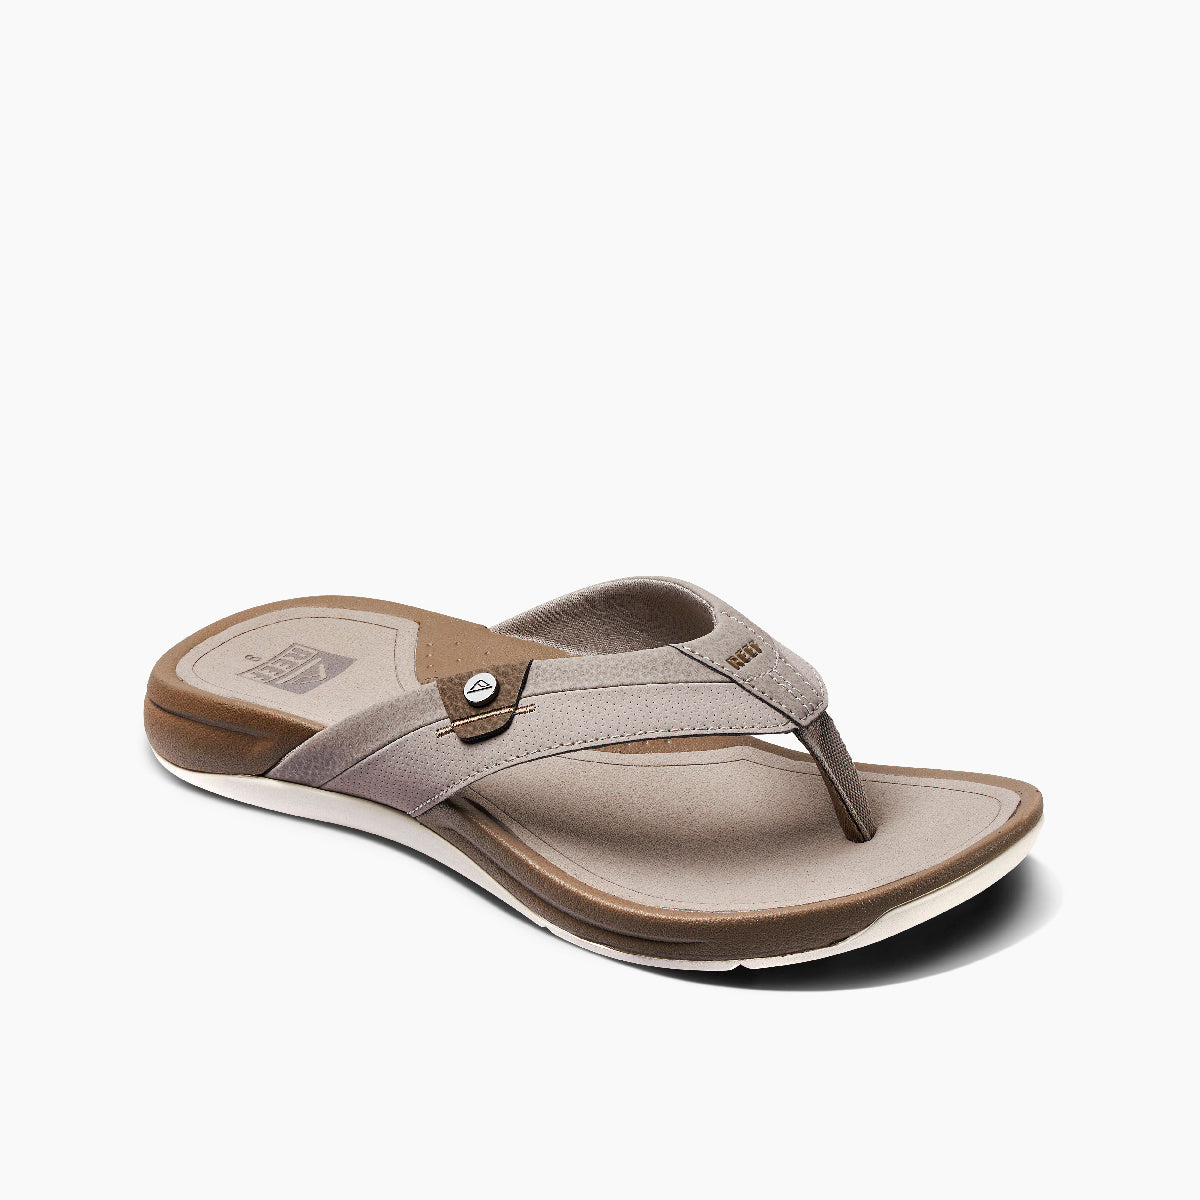 Reef Pacific Mens Sandal Taupe-Fossil 10